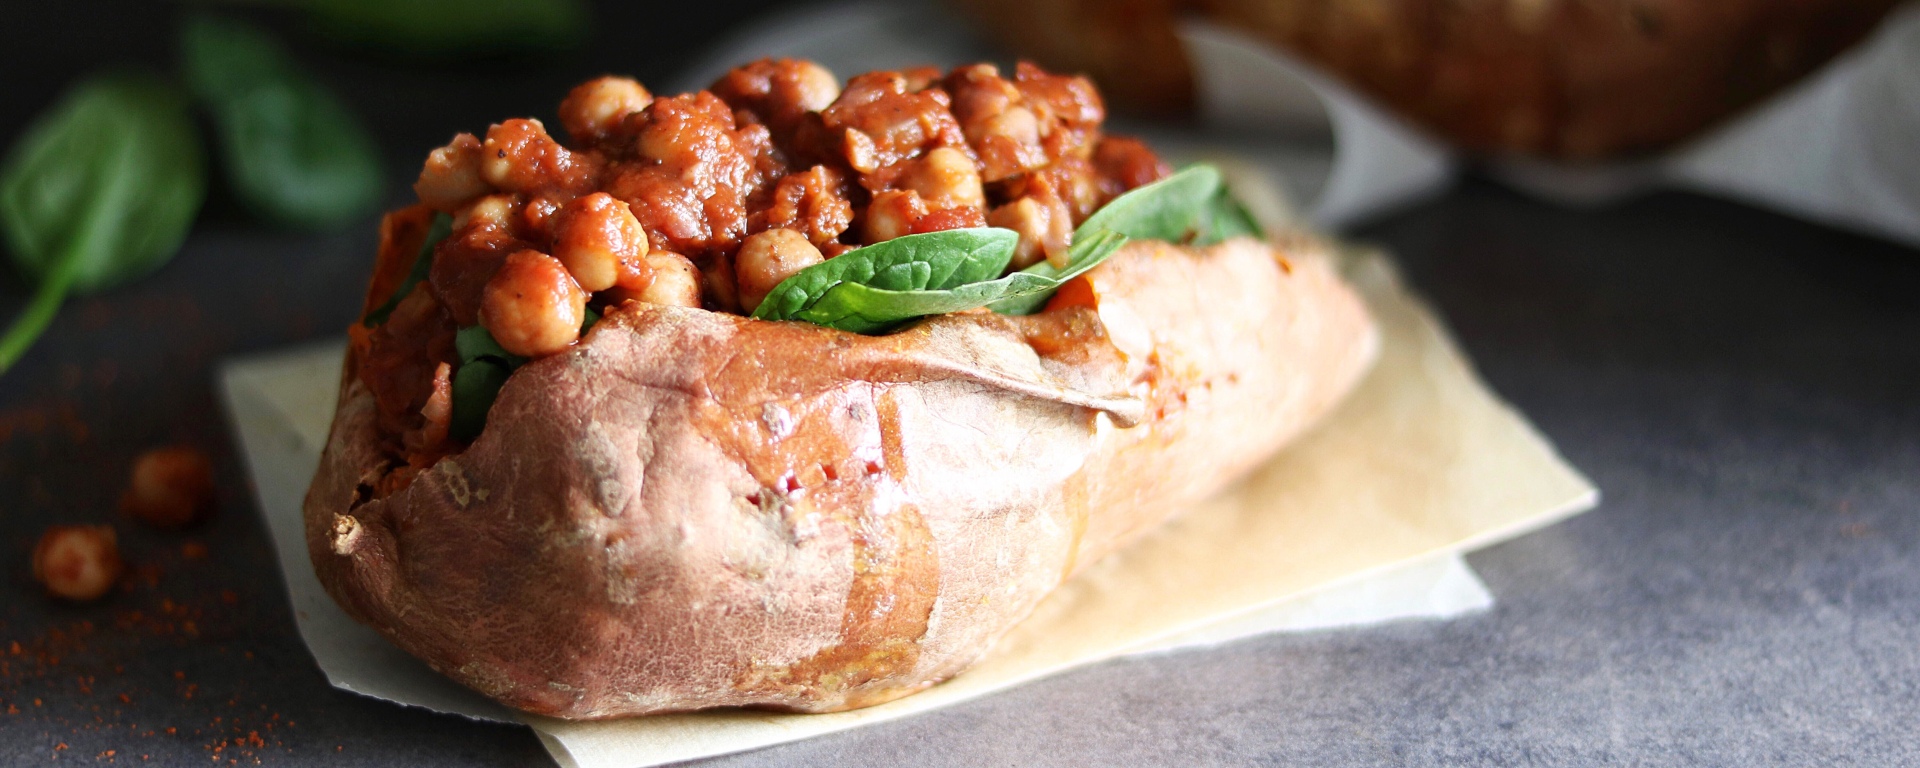 Berbere Spice Chickpeas and Sweet Potato